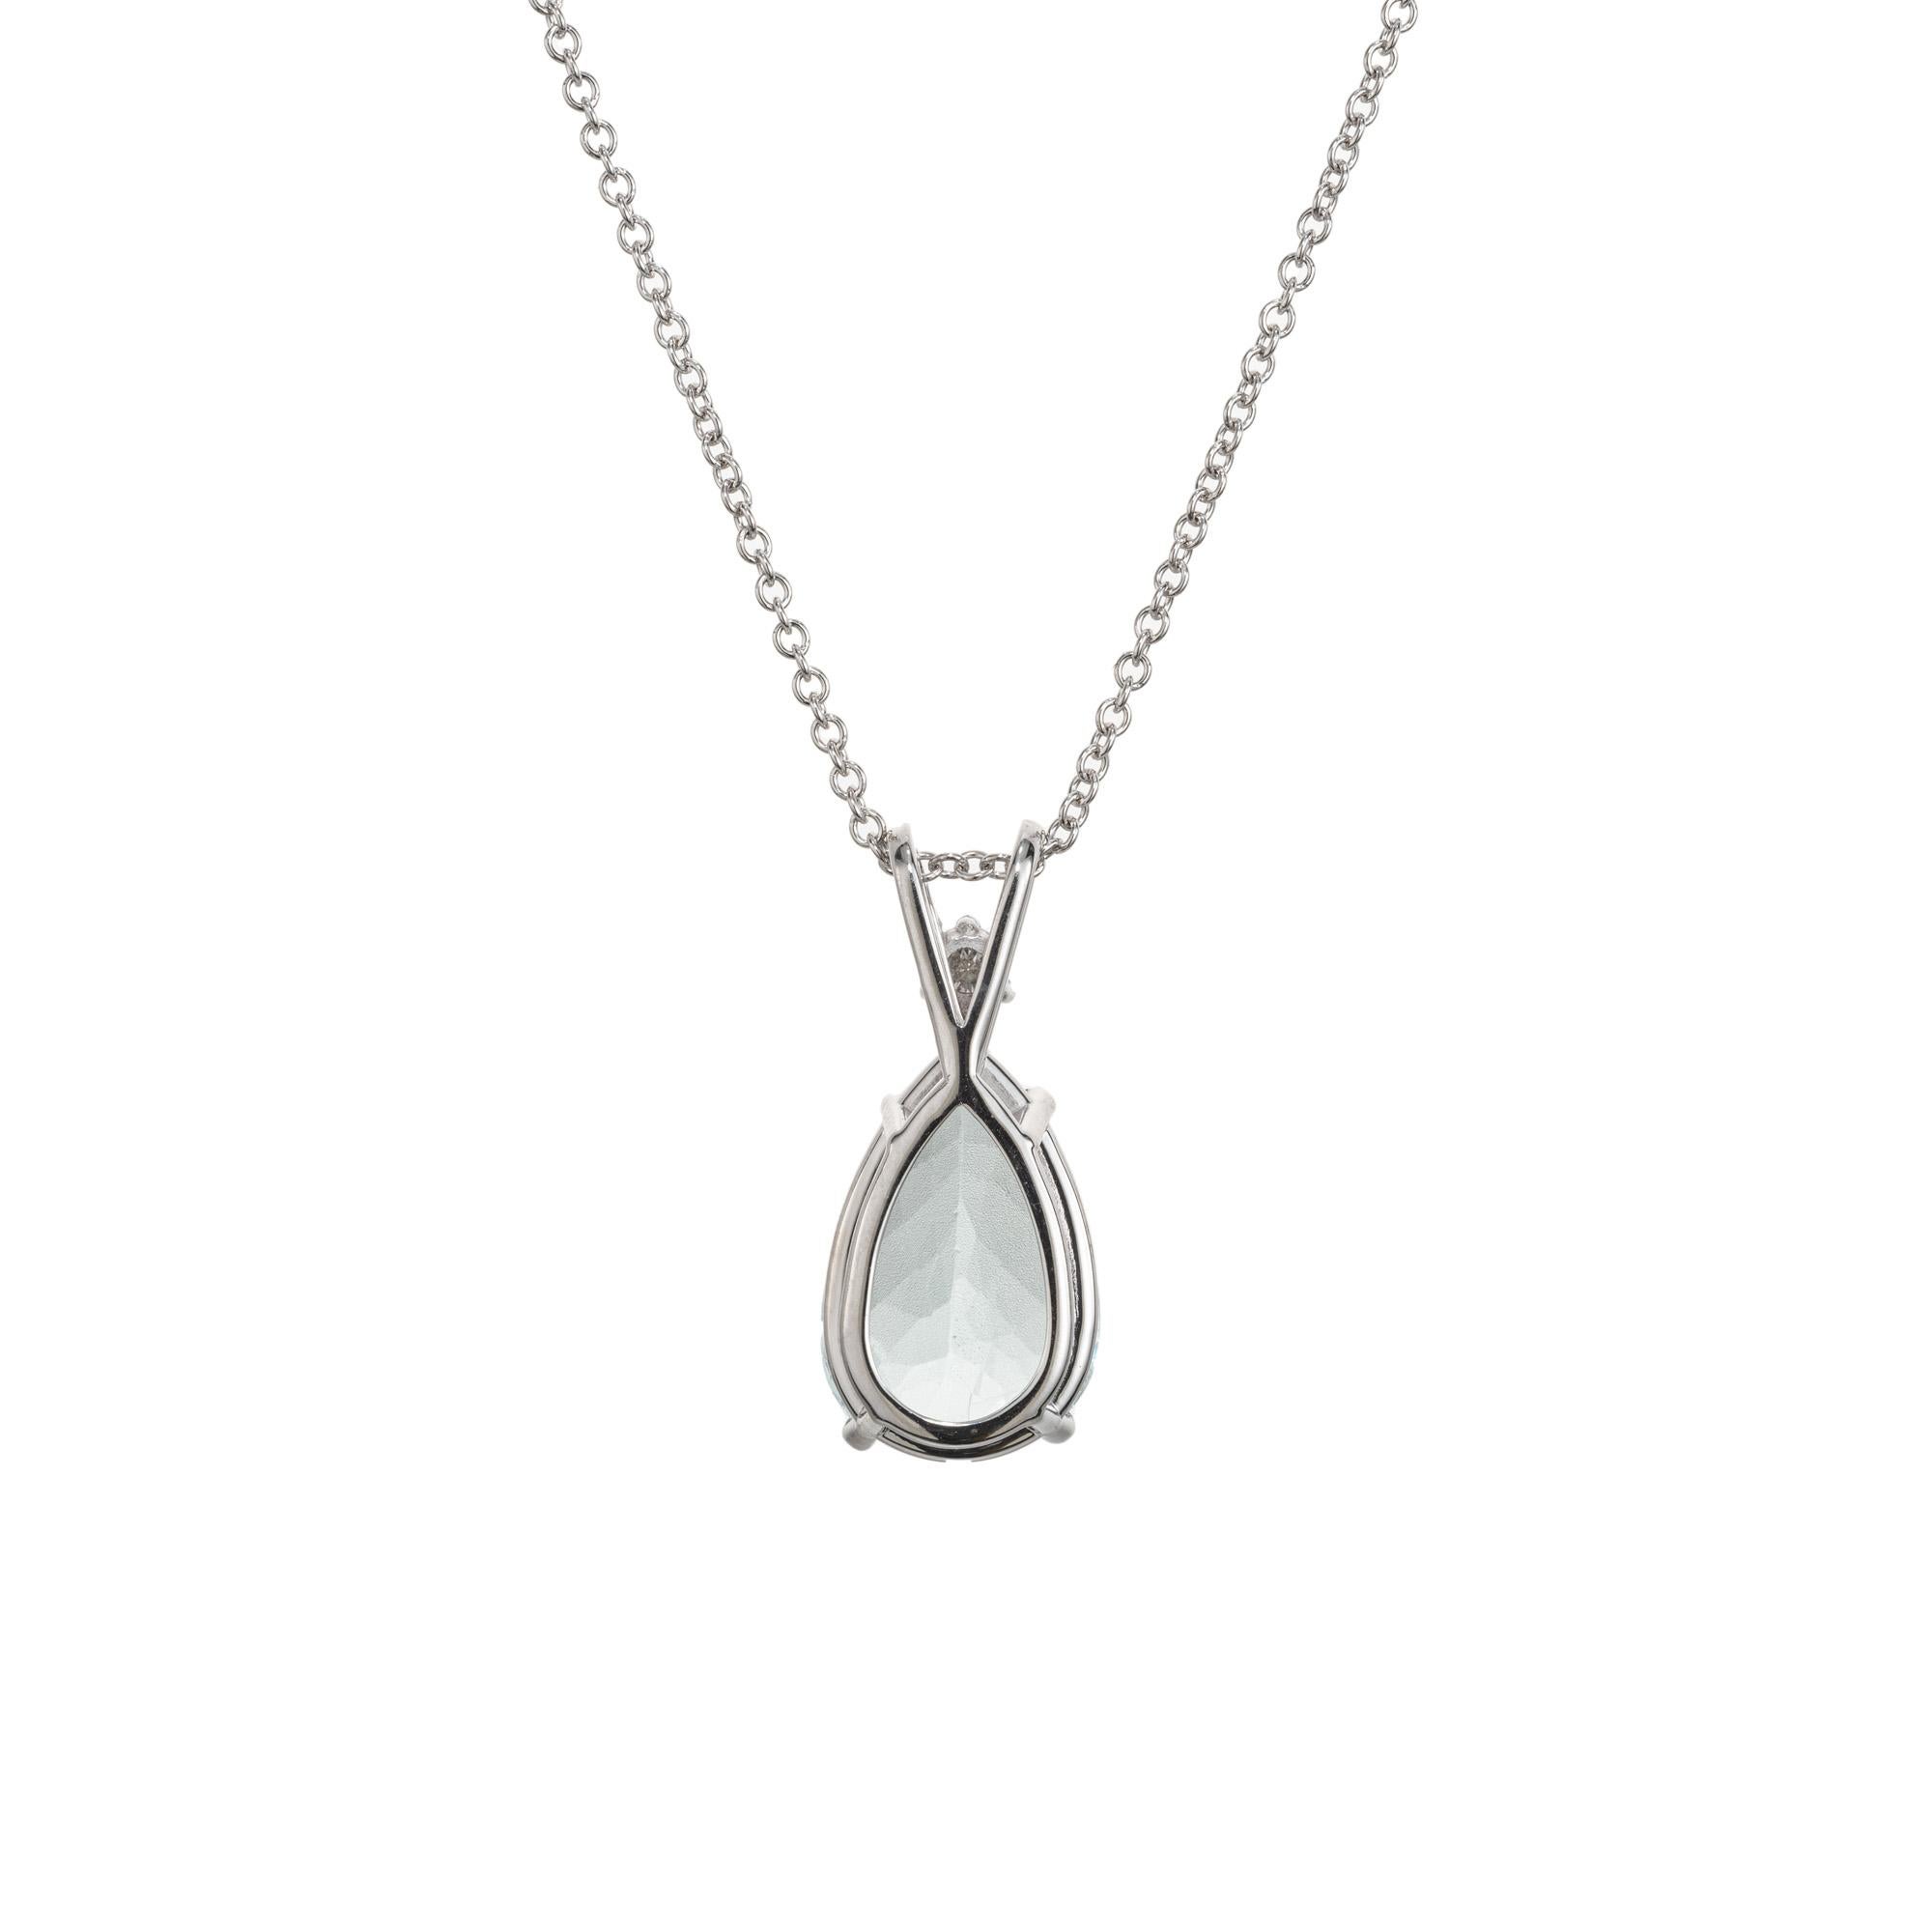 Peter Suchy 5.31 Carat Pear Aquamarine Diamond White Gold Pendant Necklace  In New Condition For Sale In Stamford, CT